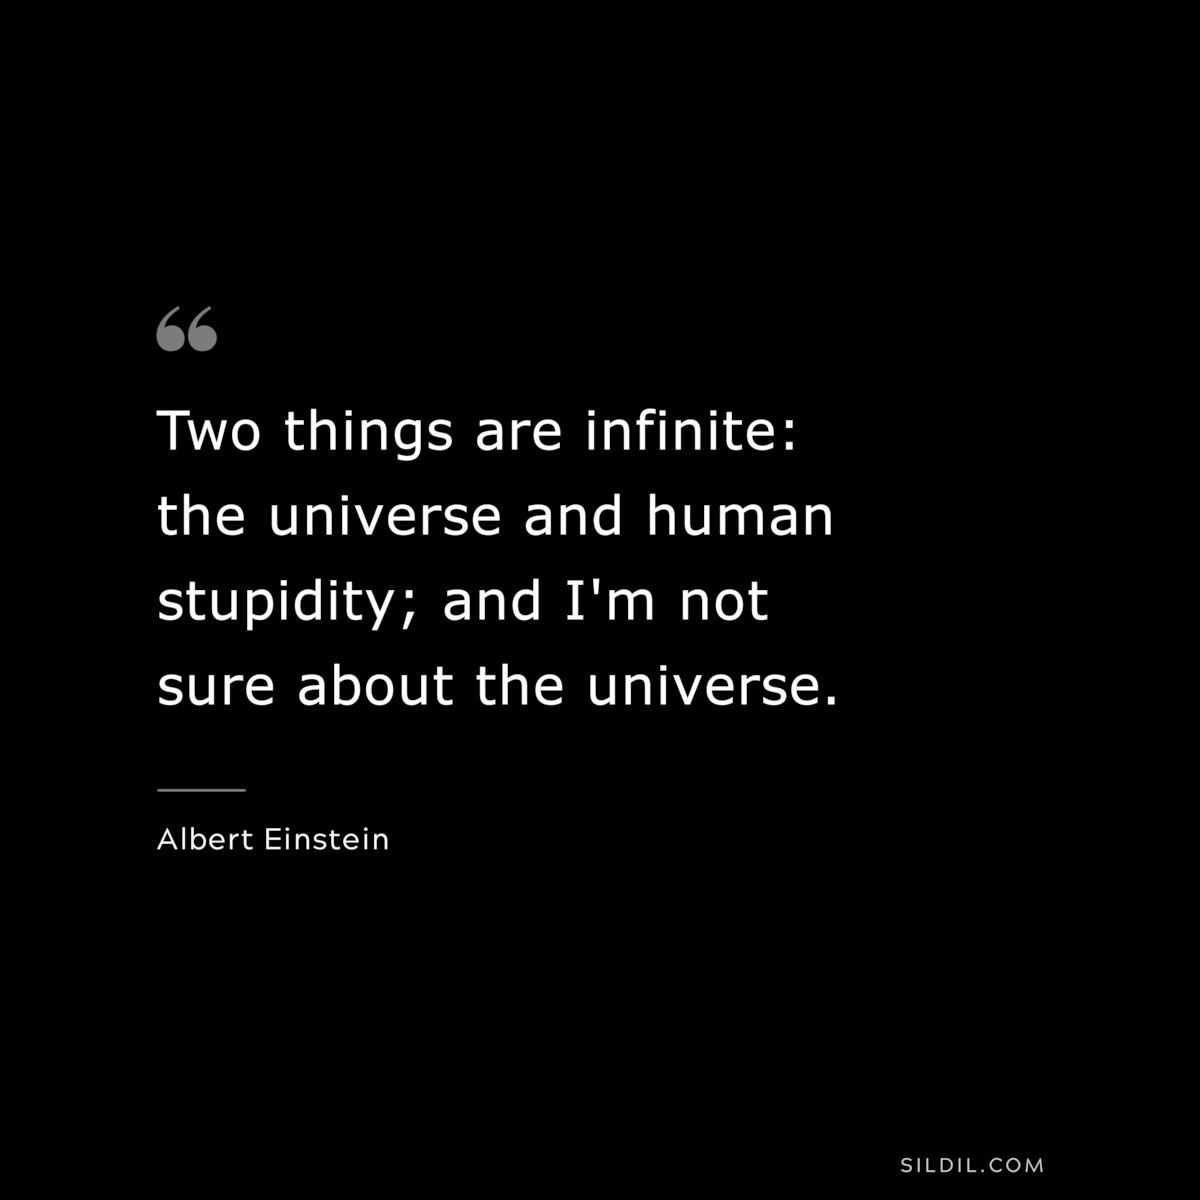 Two things are infinite: the universe and human stupidity; and I'm not sure about the universe. ― Albert Einstein